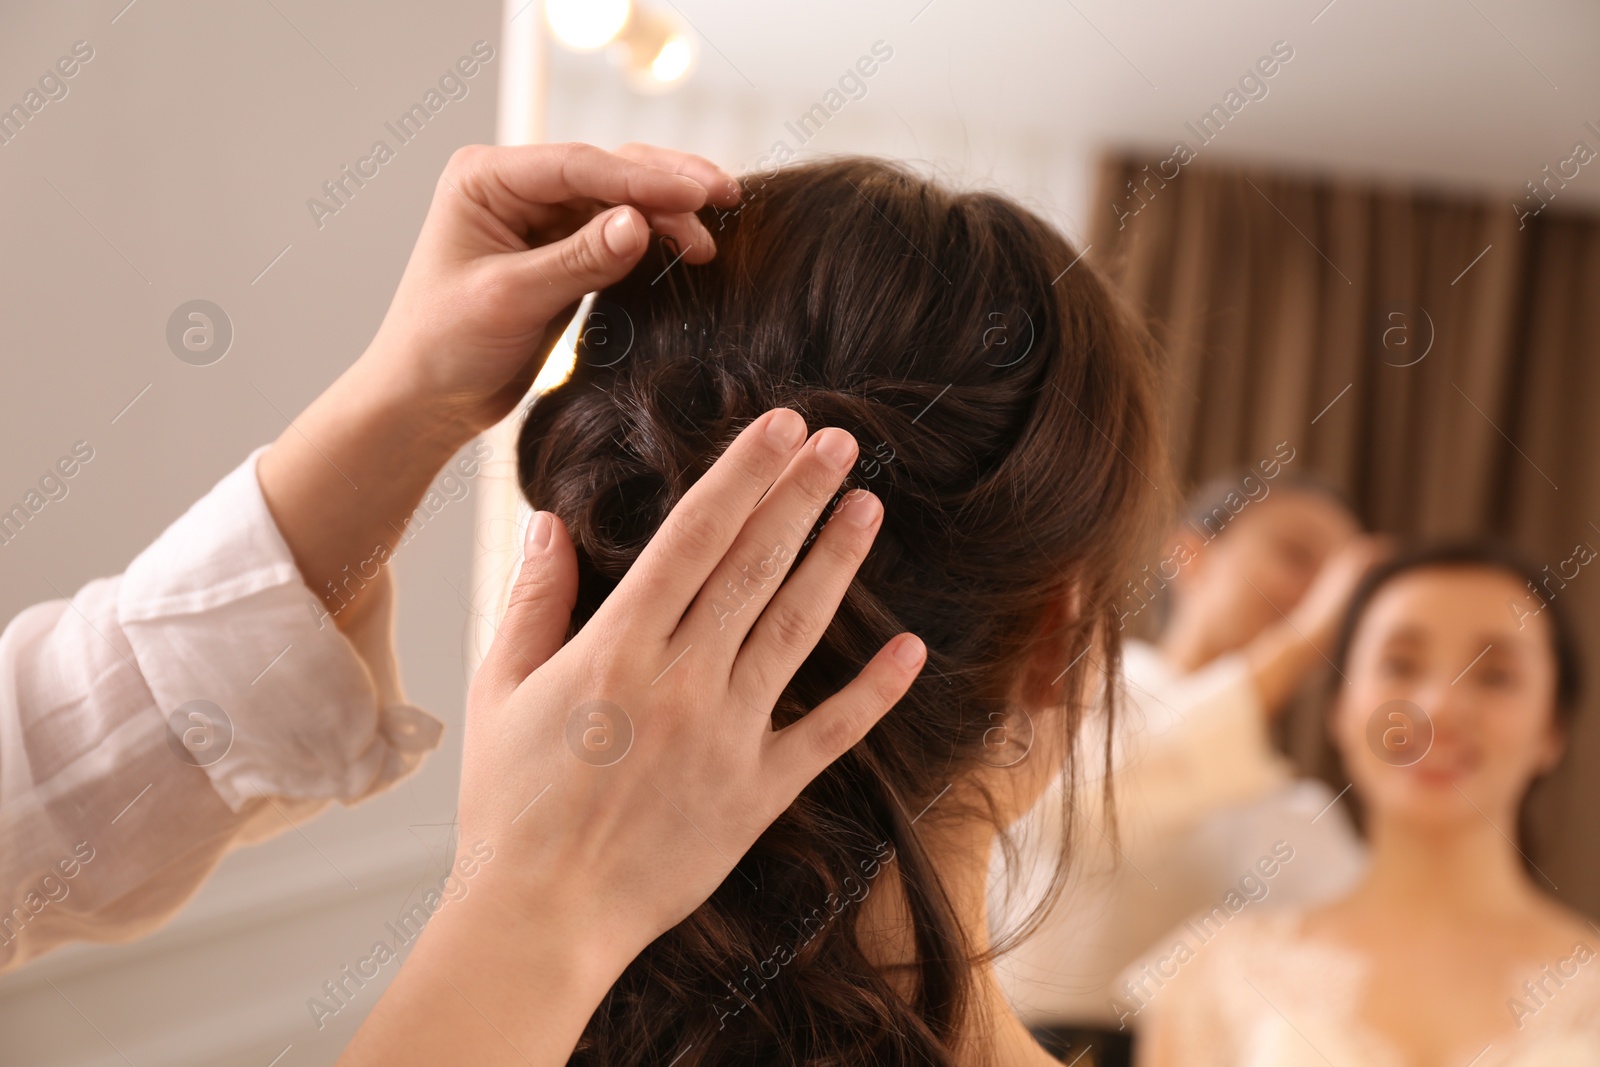 Photo of Stylist working with client in salon, making hairstyle